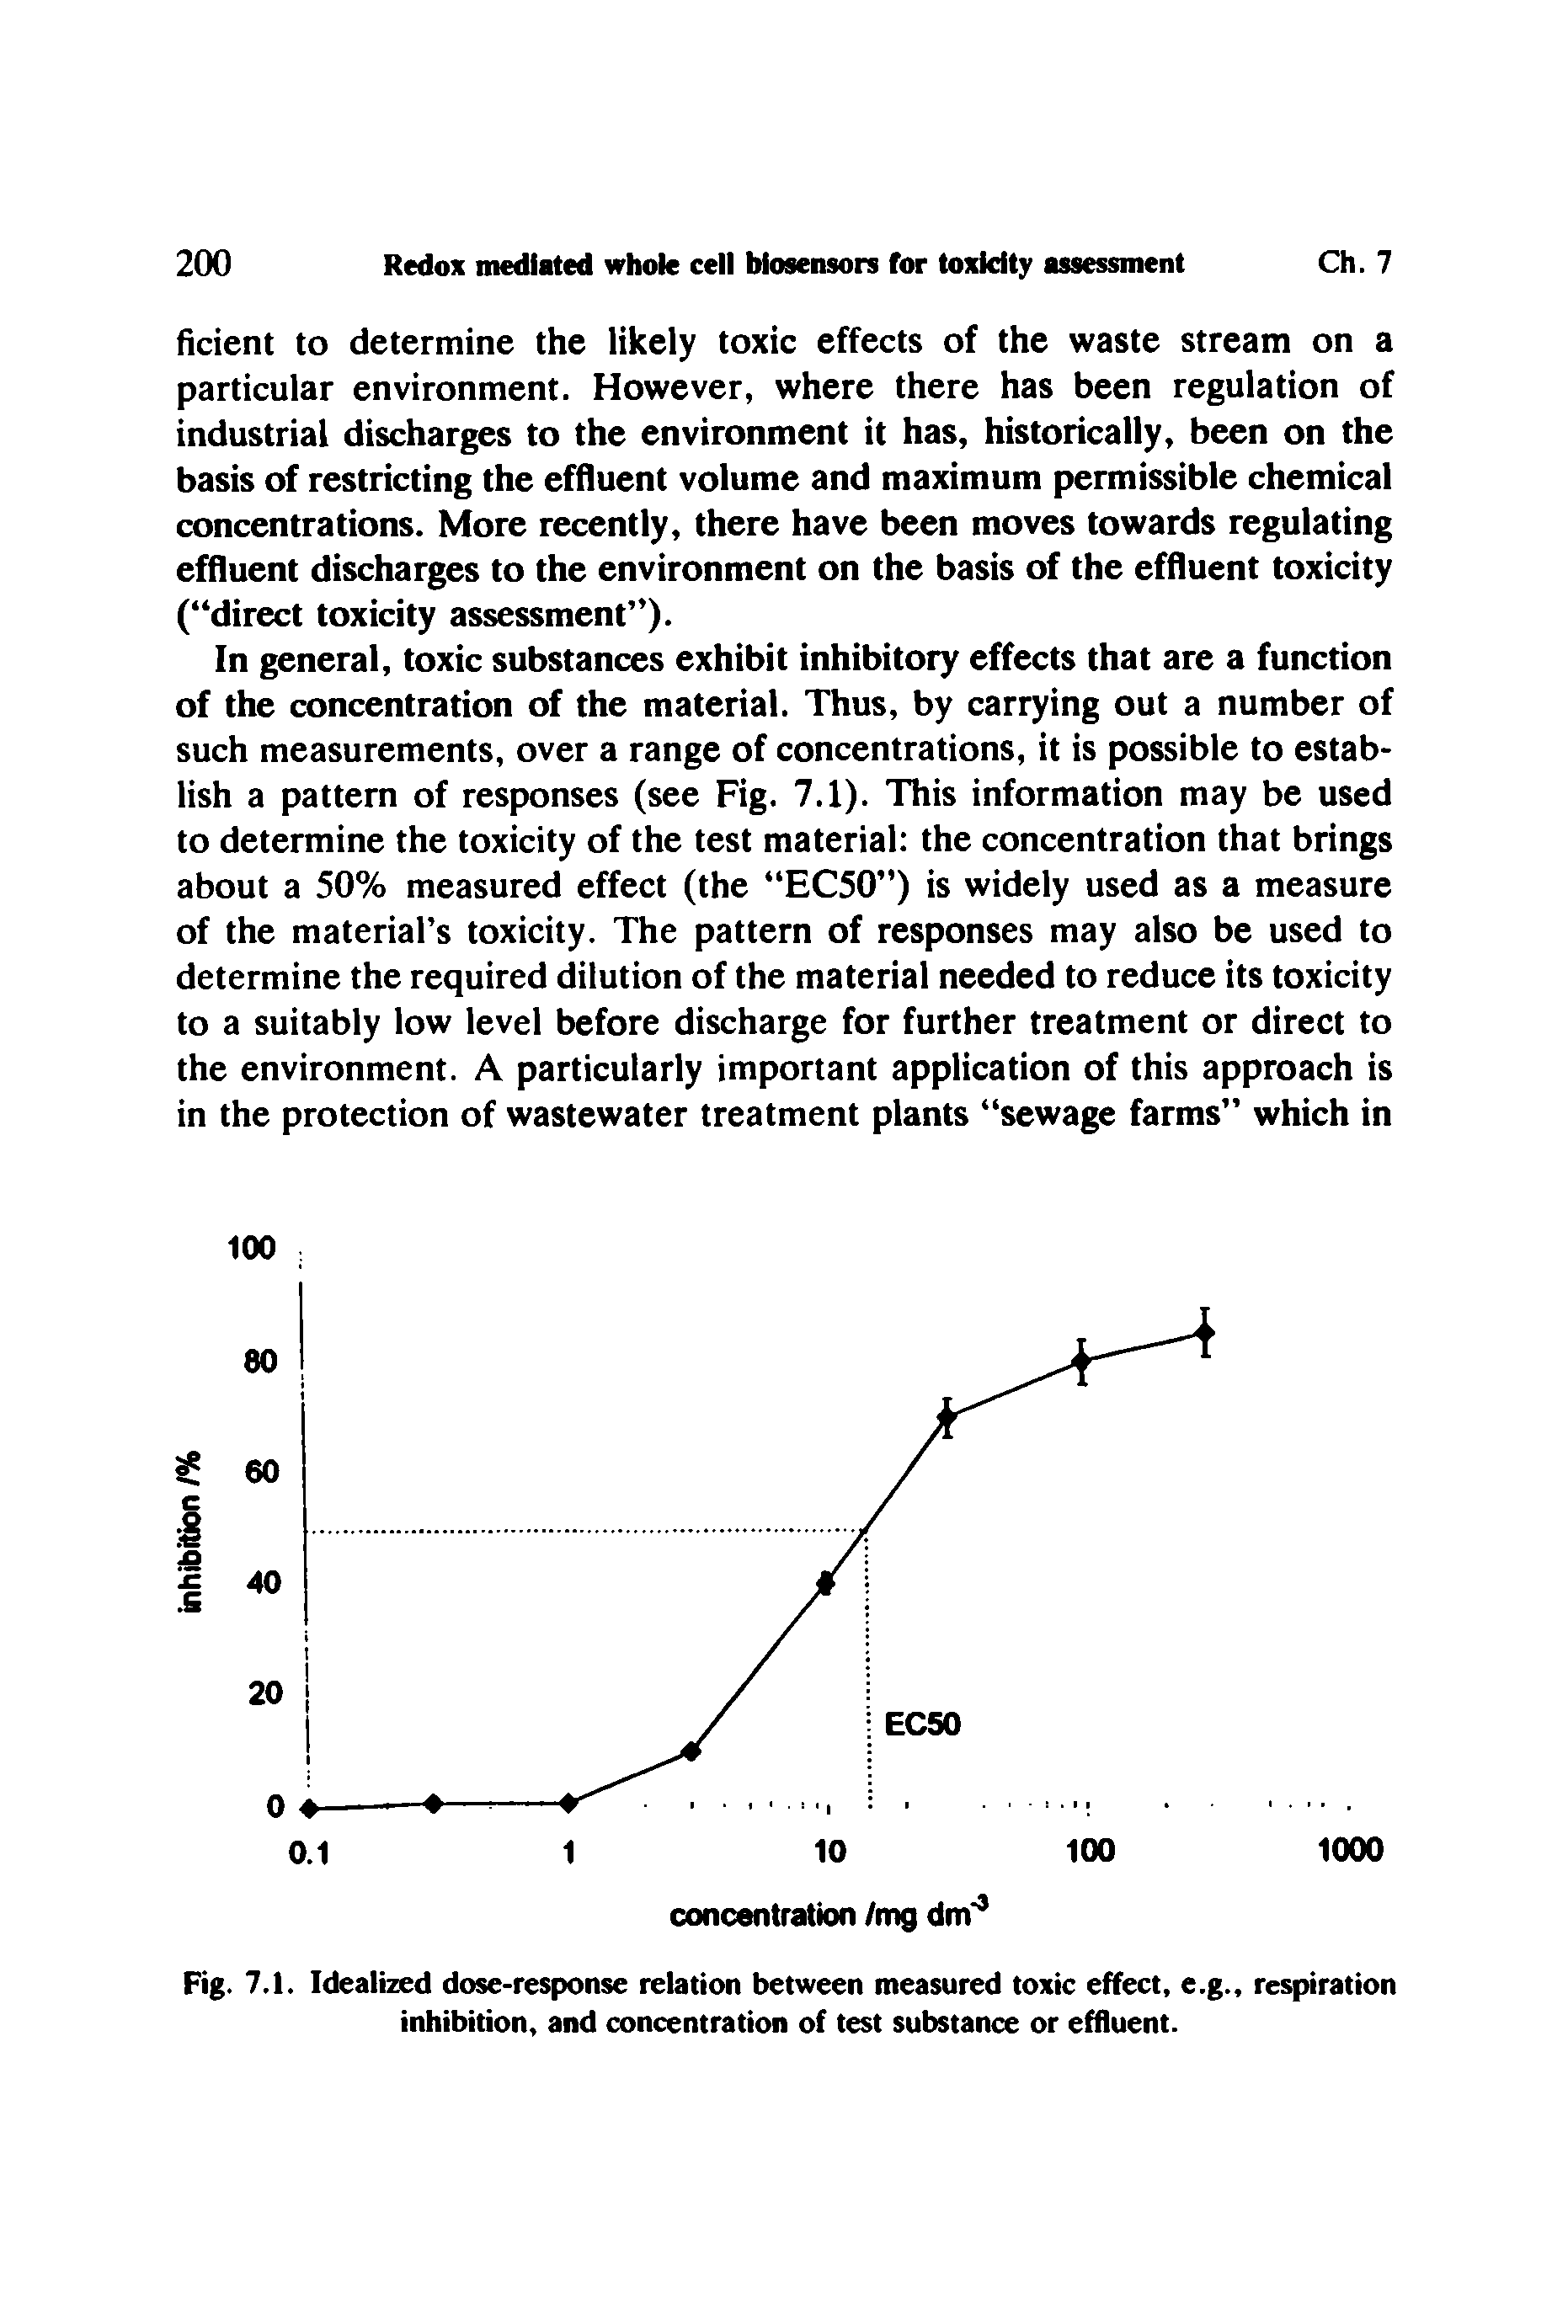 Fig. 7.1. Idealized dose-response relation between measured toxic effect, e.g., respiration inhibition, and concentration of test substance or effluent.